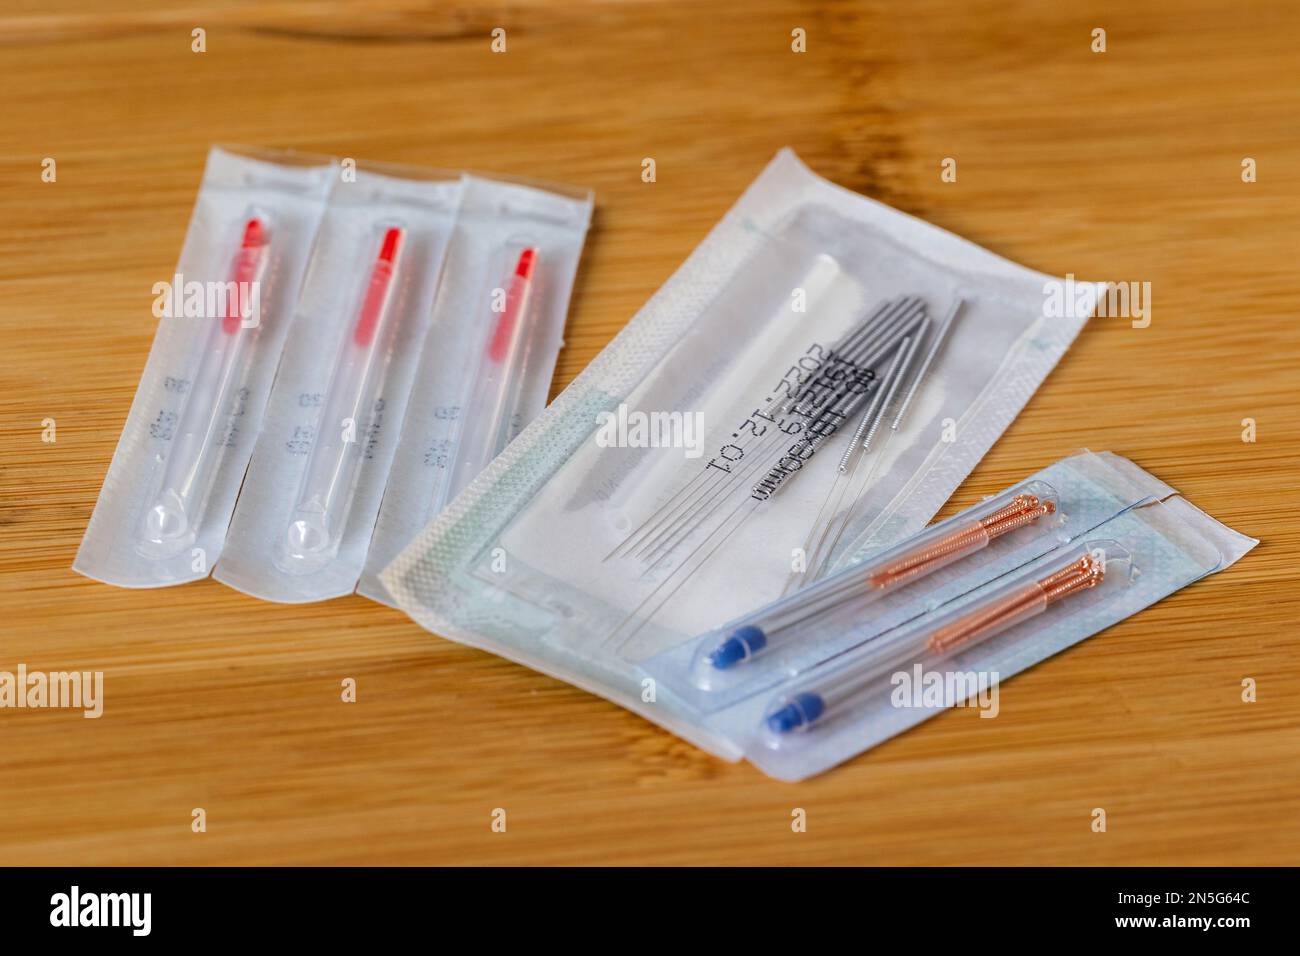 A portrait of multiple packages of different acupuncture needles, ready to use on someone with health issues. There are also plastic tubes inside in o Stock Photo